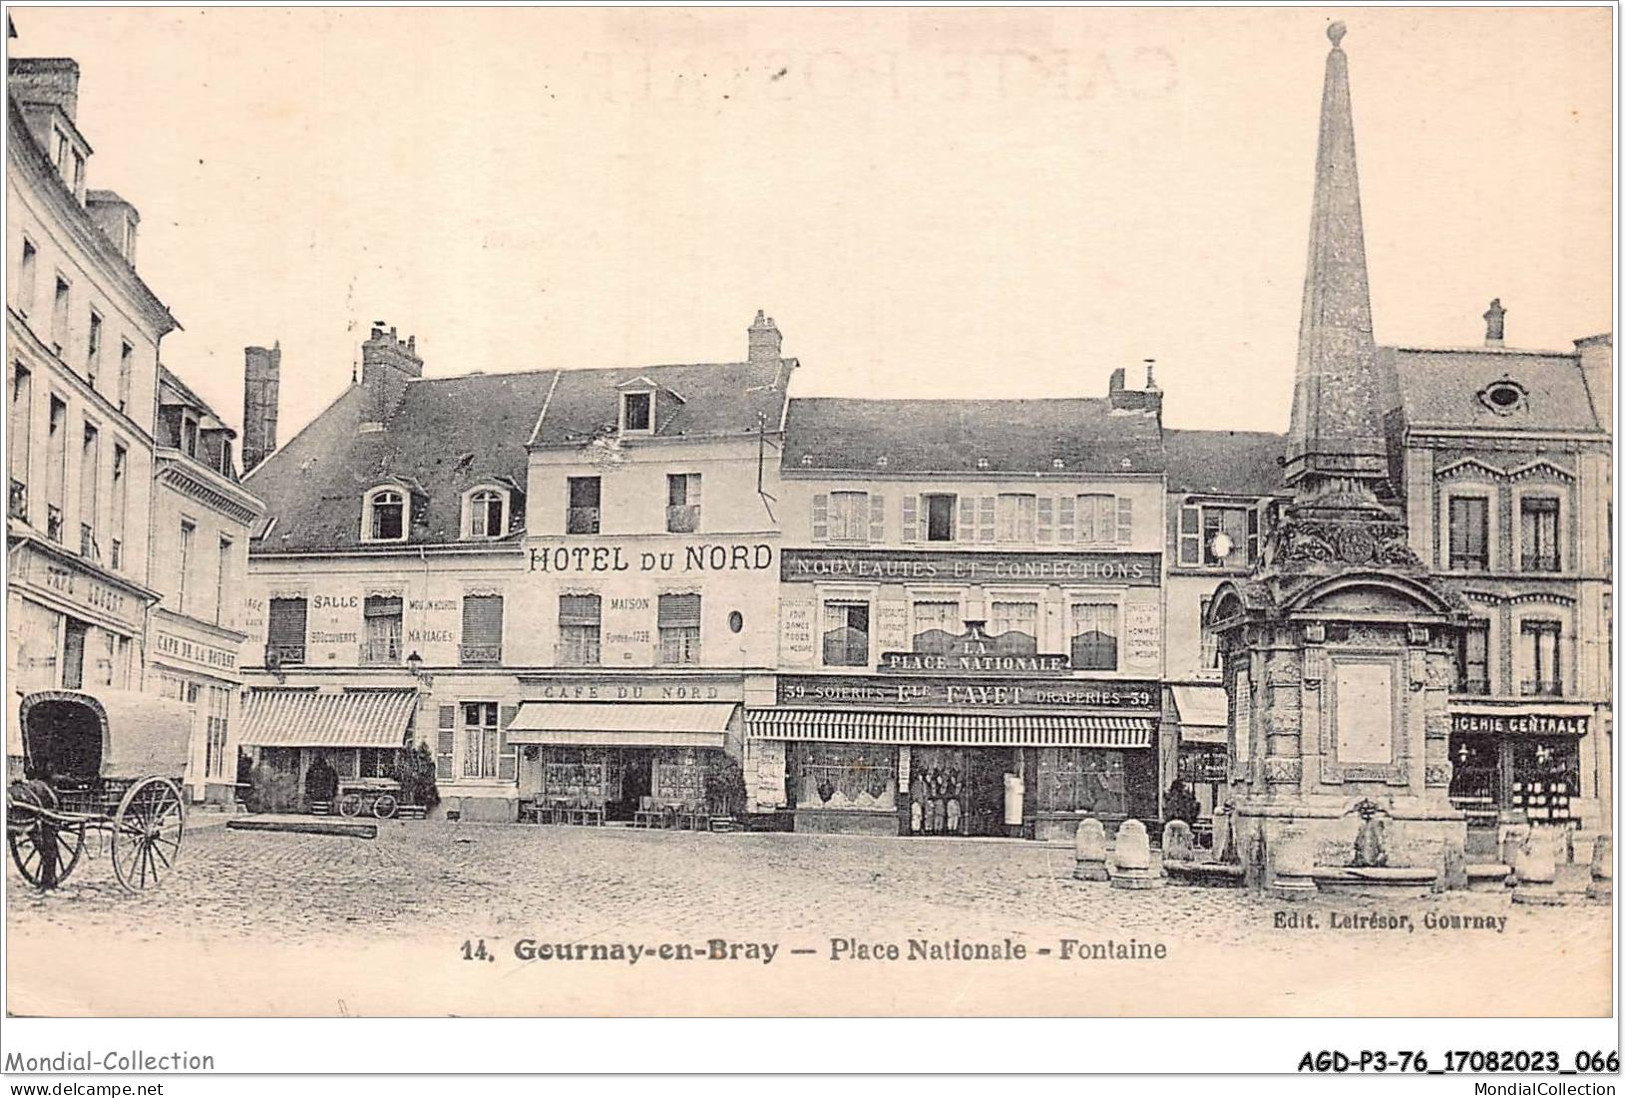 AGDP3-76-0218 - GOURNAY-EN-BRAY - Place Nationale - Fontaine  - Gournay-en-Bray